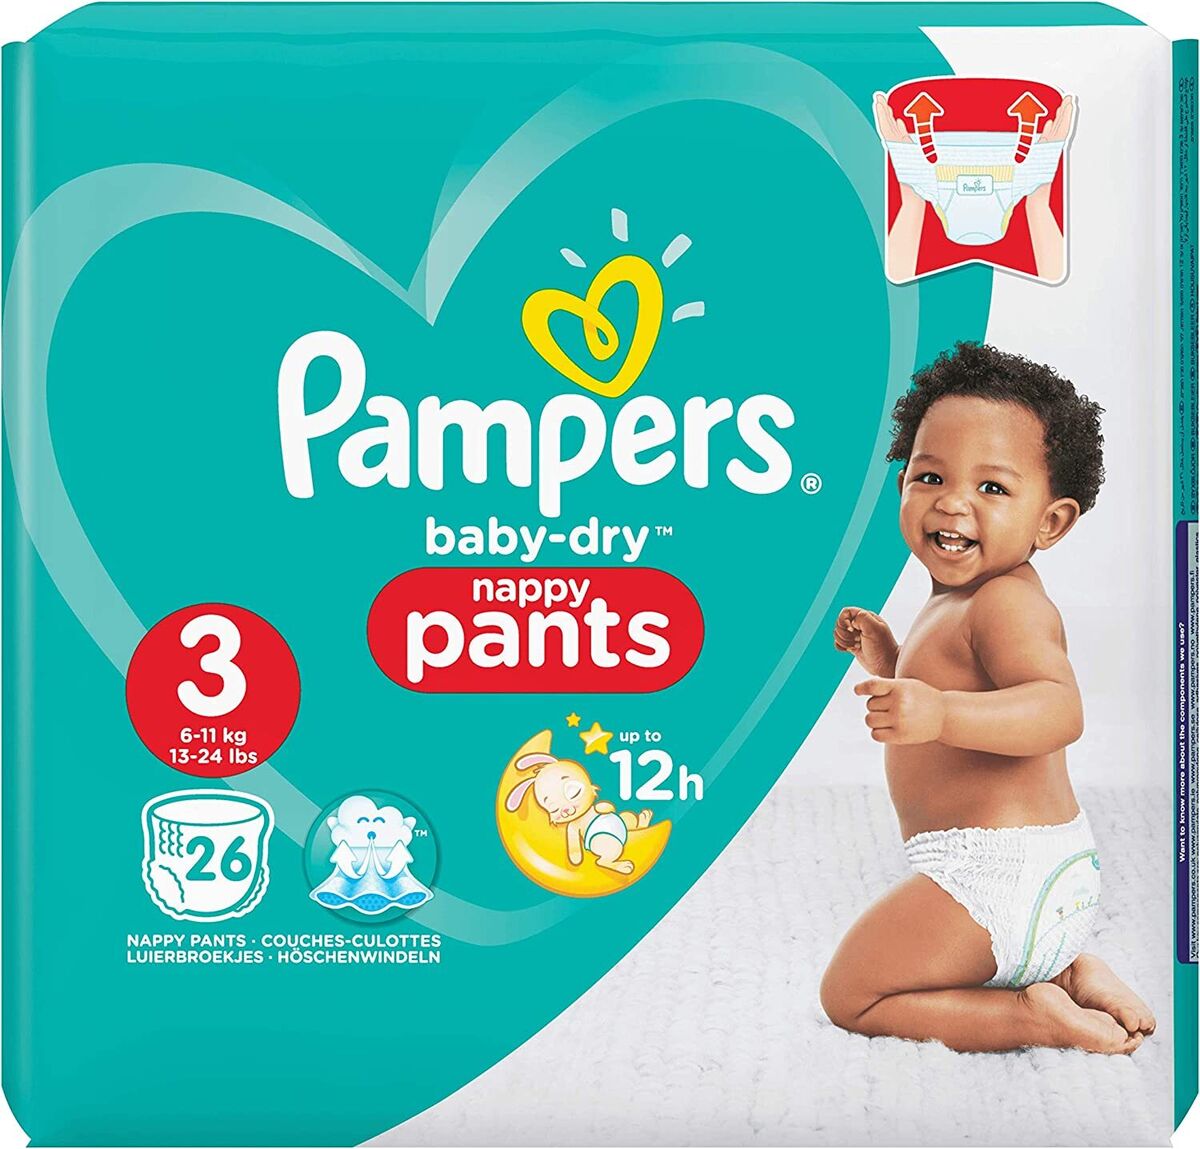 pampers active baby 1 208